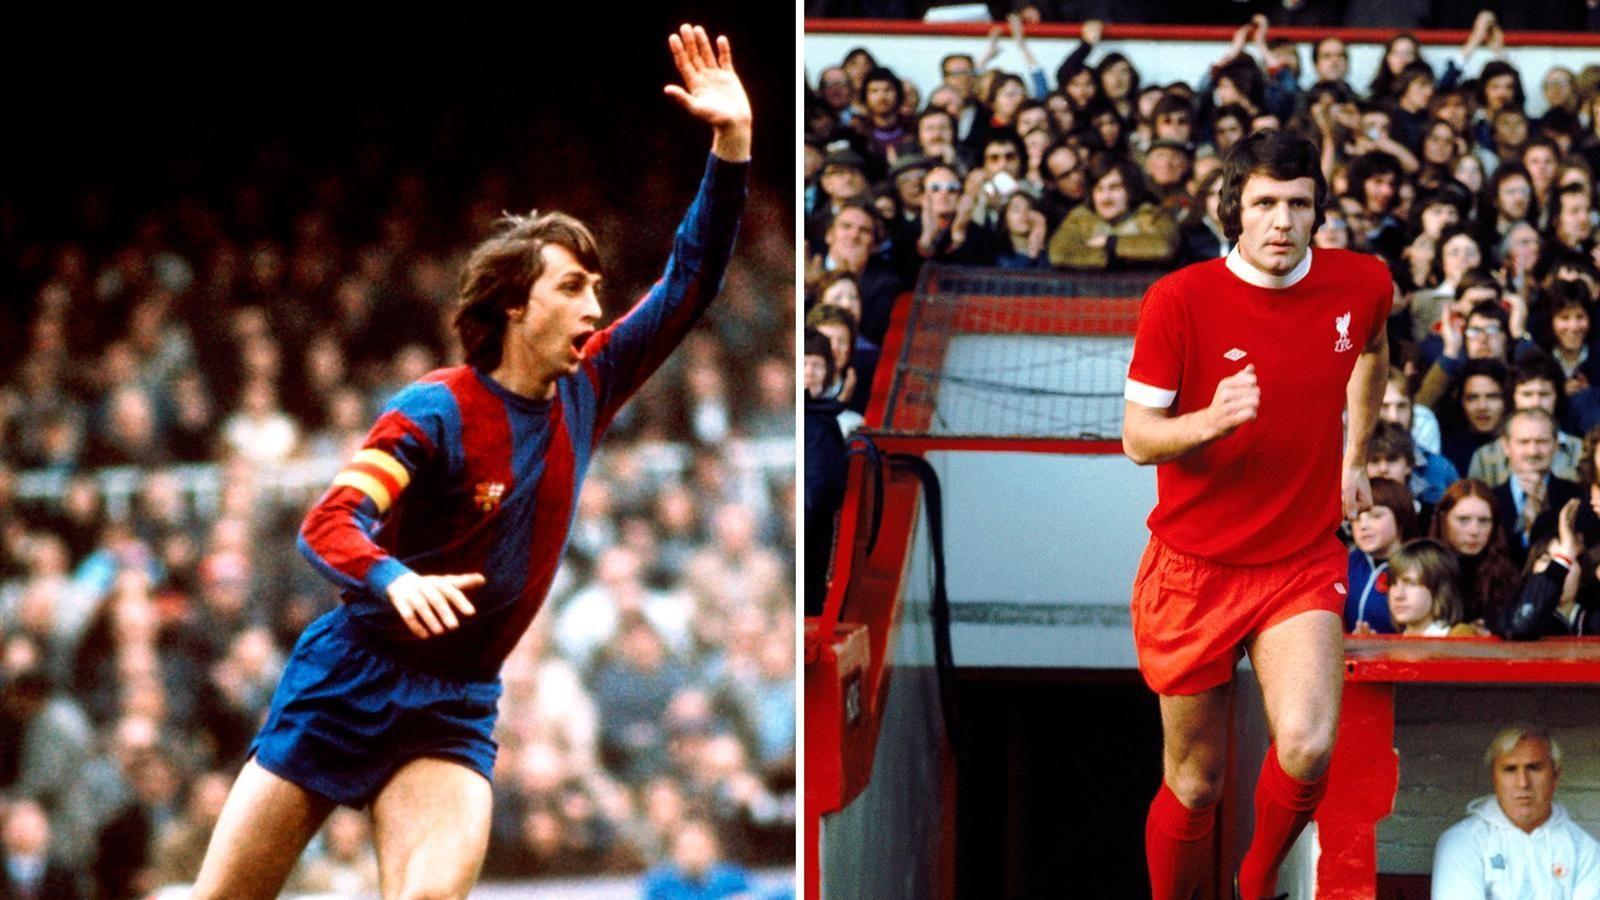 Johan Cruyff and Liverpool: The unlikely catalysts for the other's